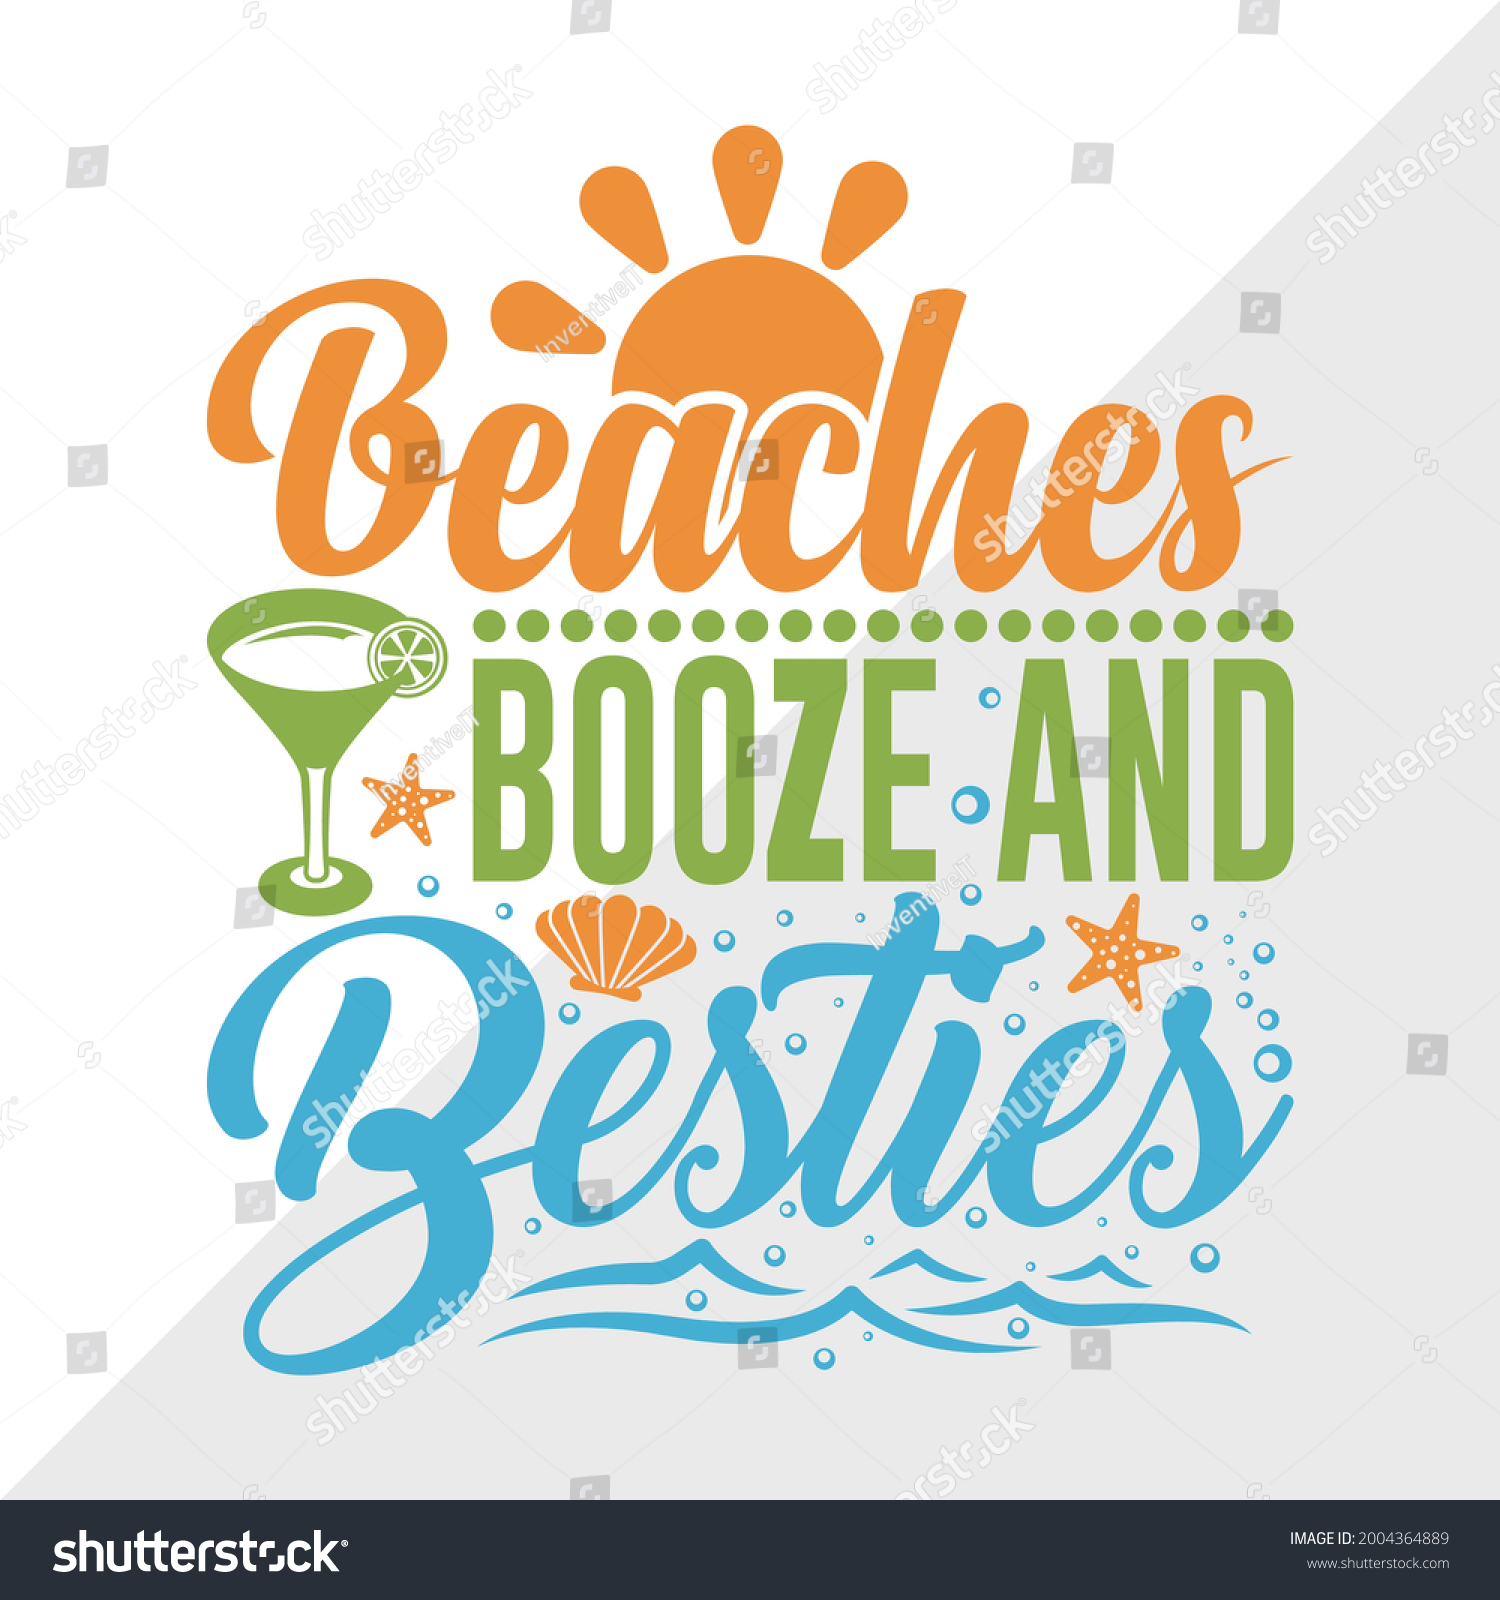 SVG of Beaches Booze And Besties Vector Illustration Silhouette svg